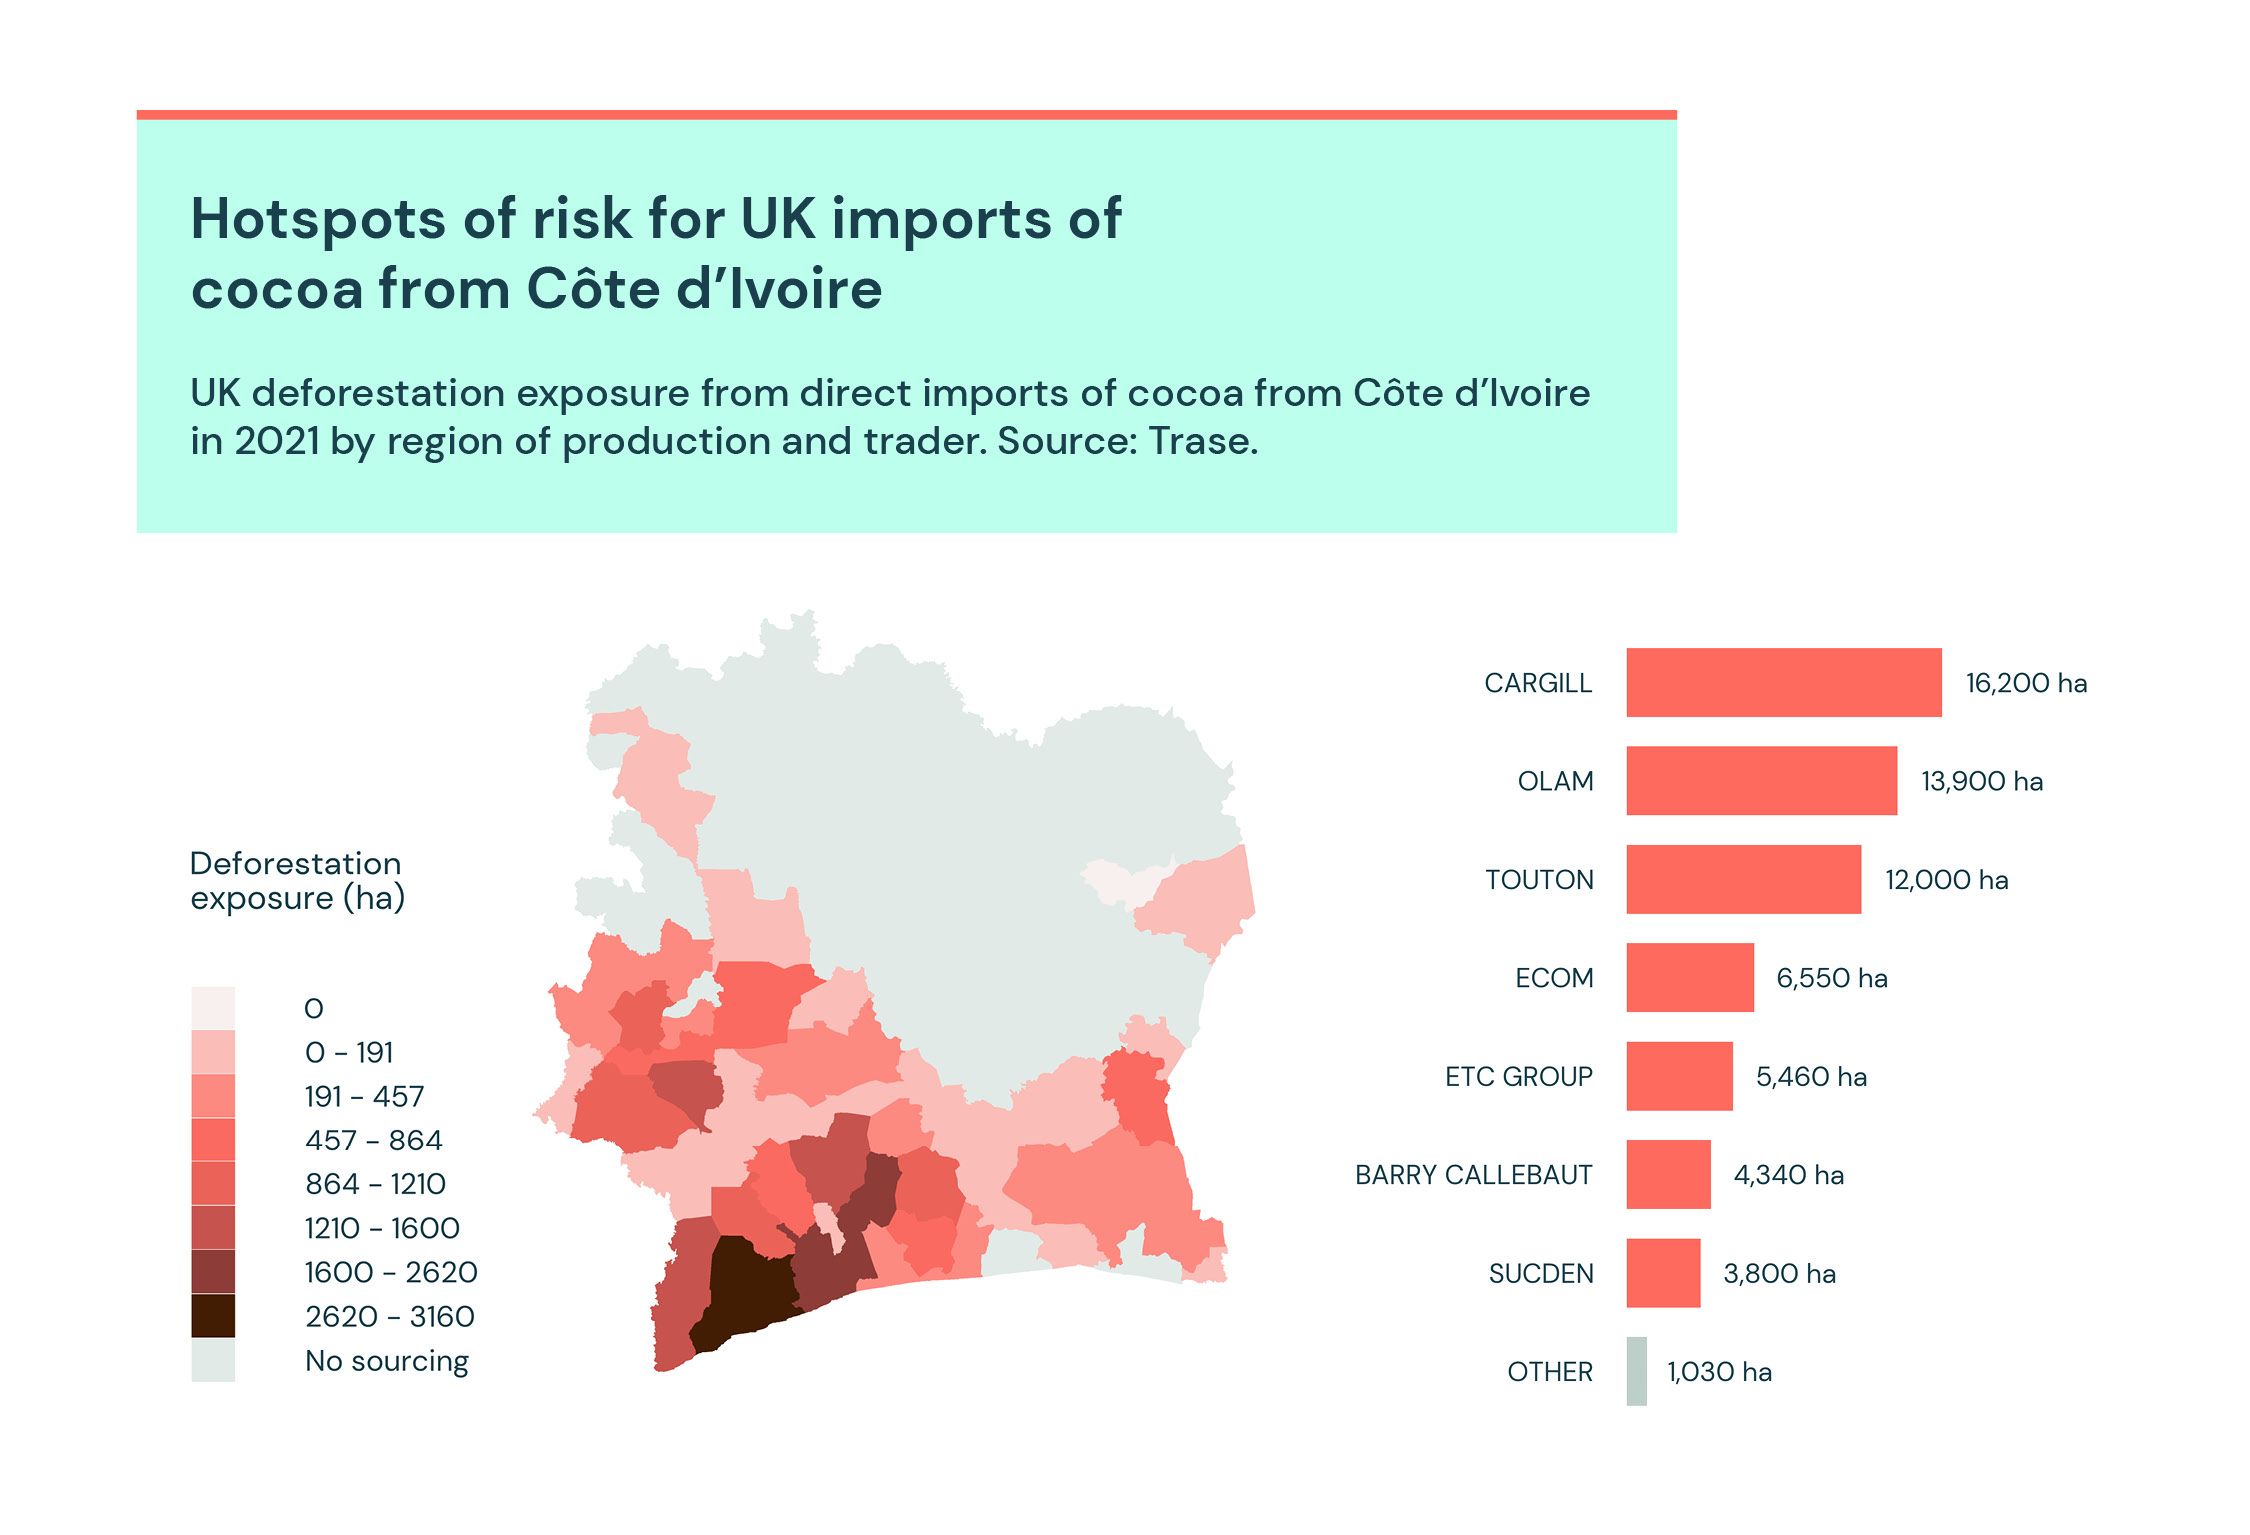 Hotspots of risk for UK imports of cocoa from Côte d'Ivoire